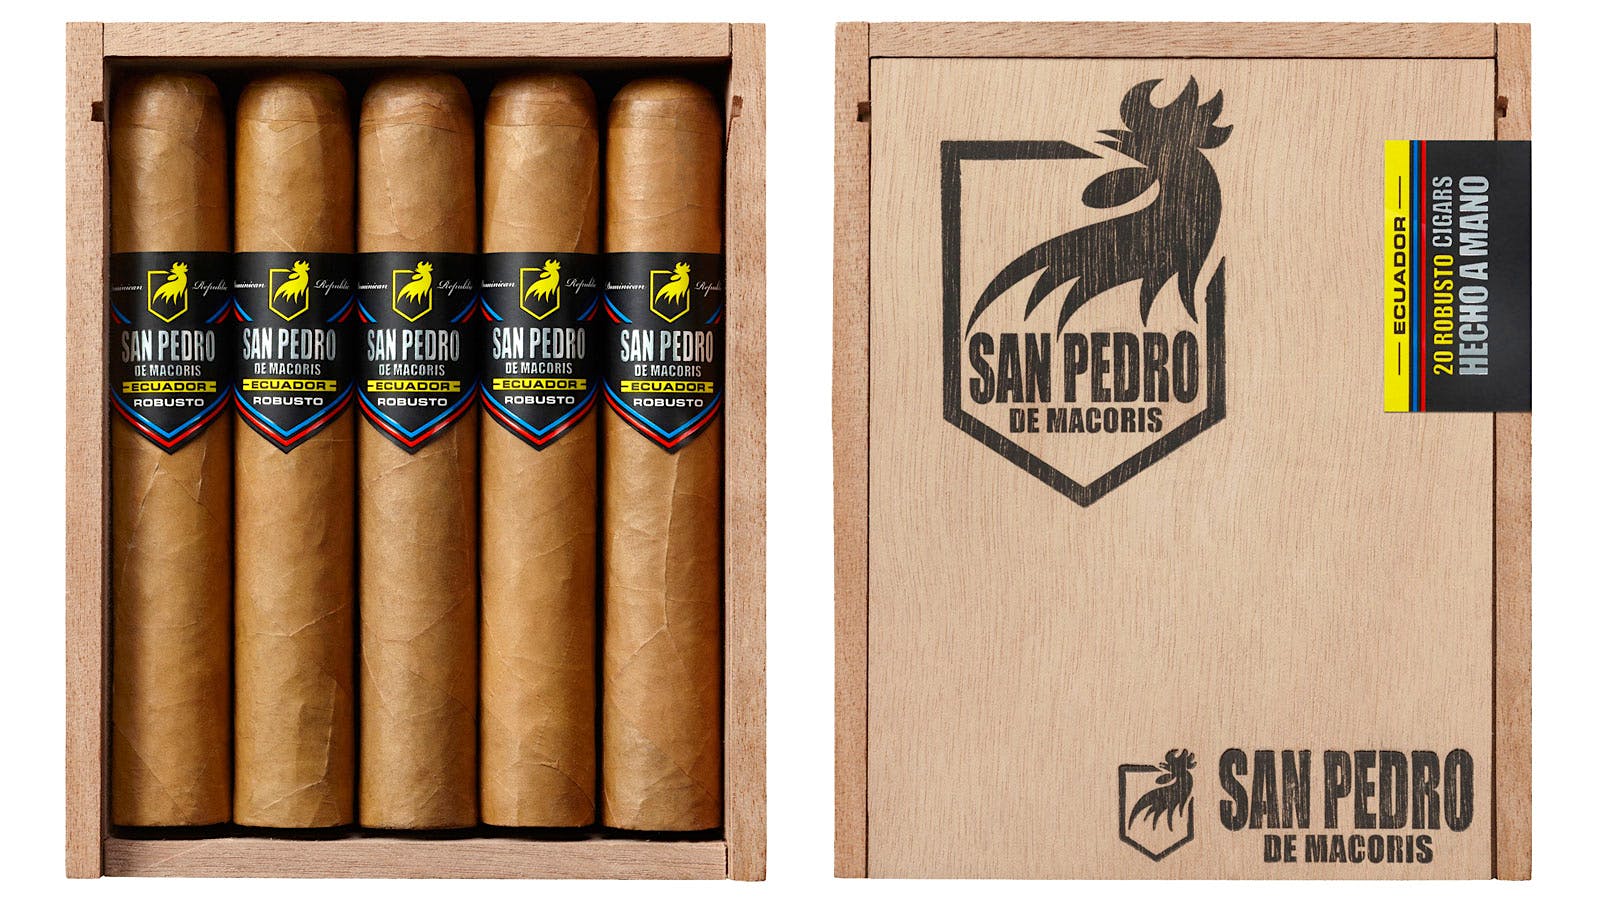 San Pedro de Macorís Ecuador Connecticut wears a Connecticut-seed wrapper grown in Ecuador, Dominican binder and fillers from Brazil and the Dominican Republic.